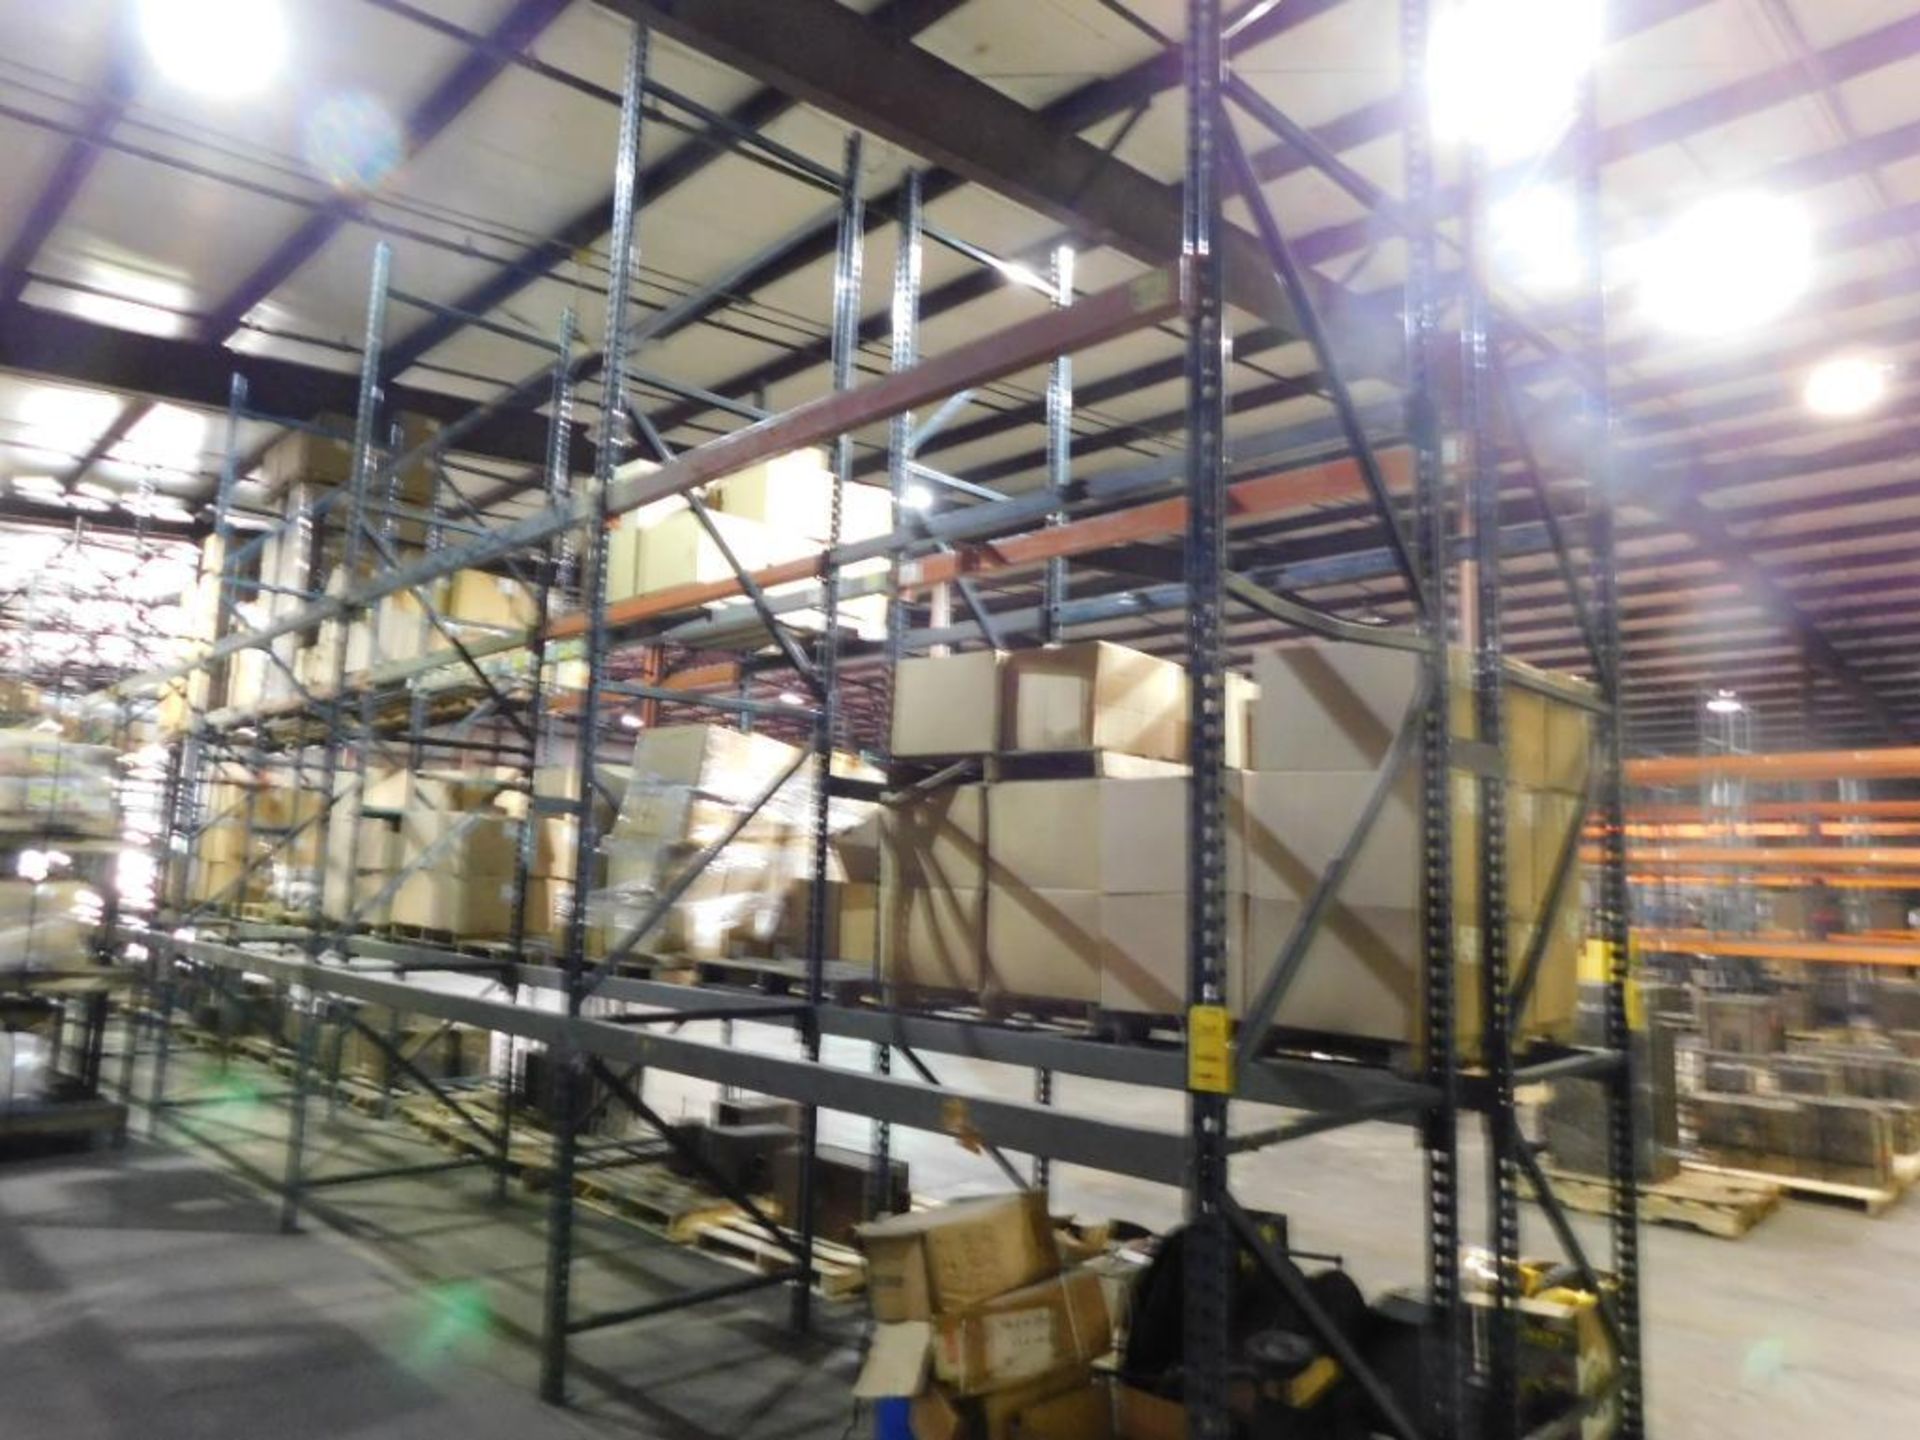 LOT: (12) Sections 16 ft. x 8 ft. x 42 in. Pallet Rack (may be disassembled by auction date) (